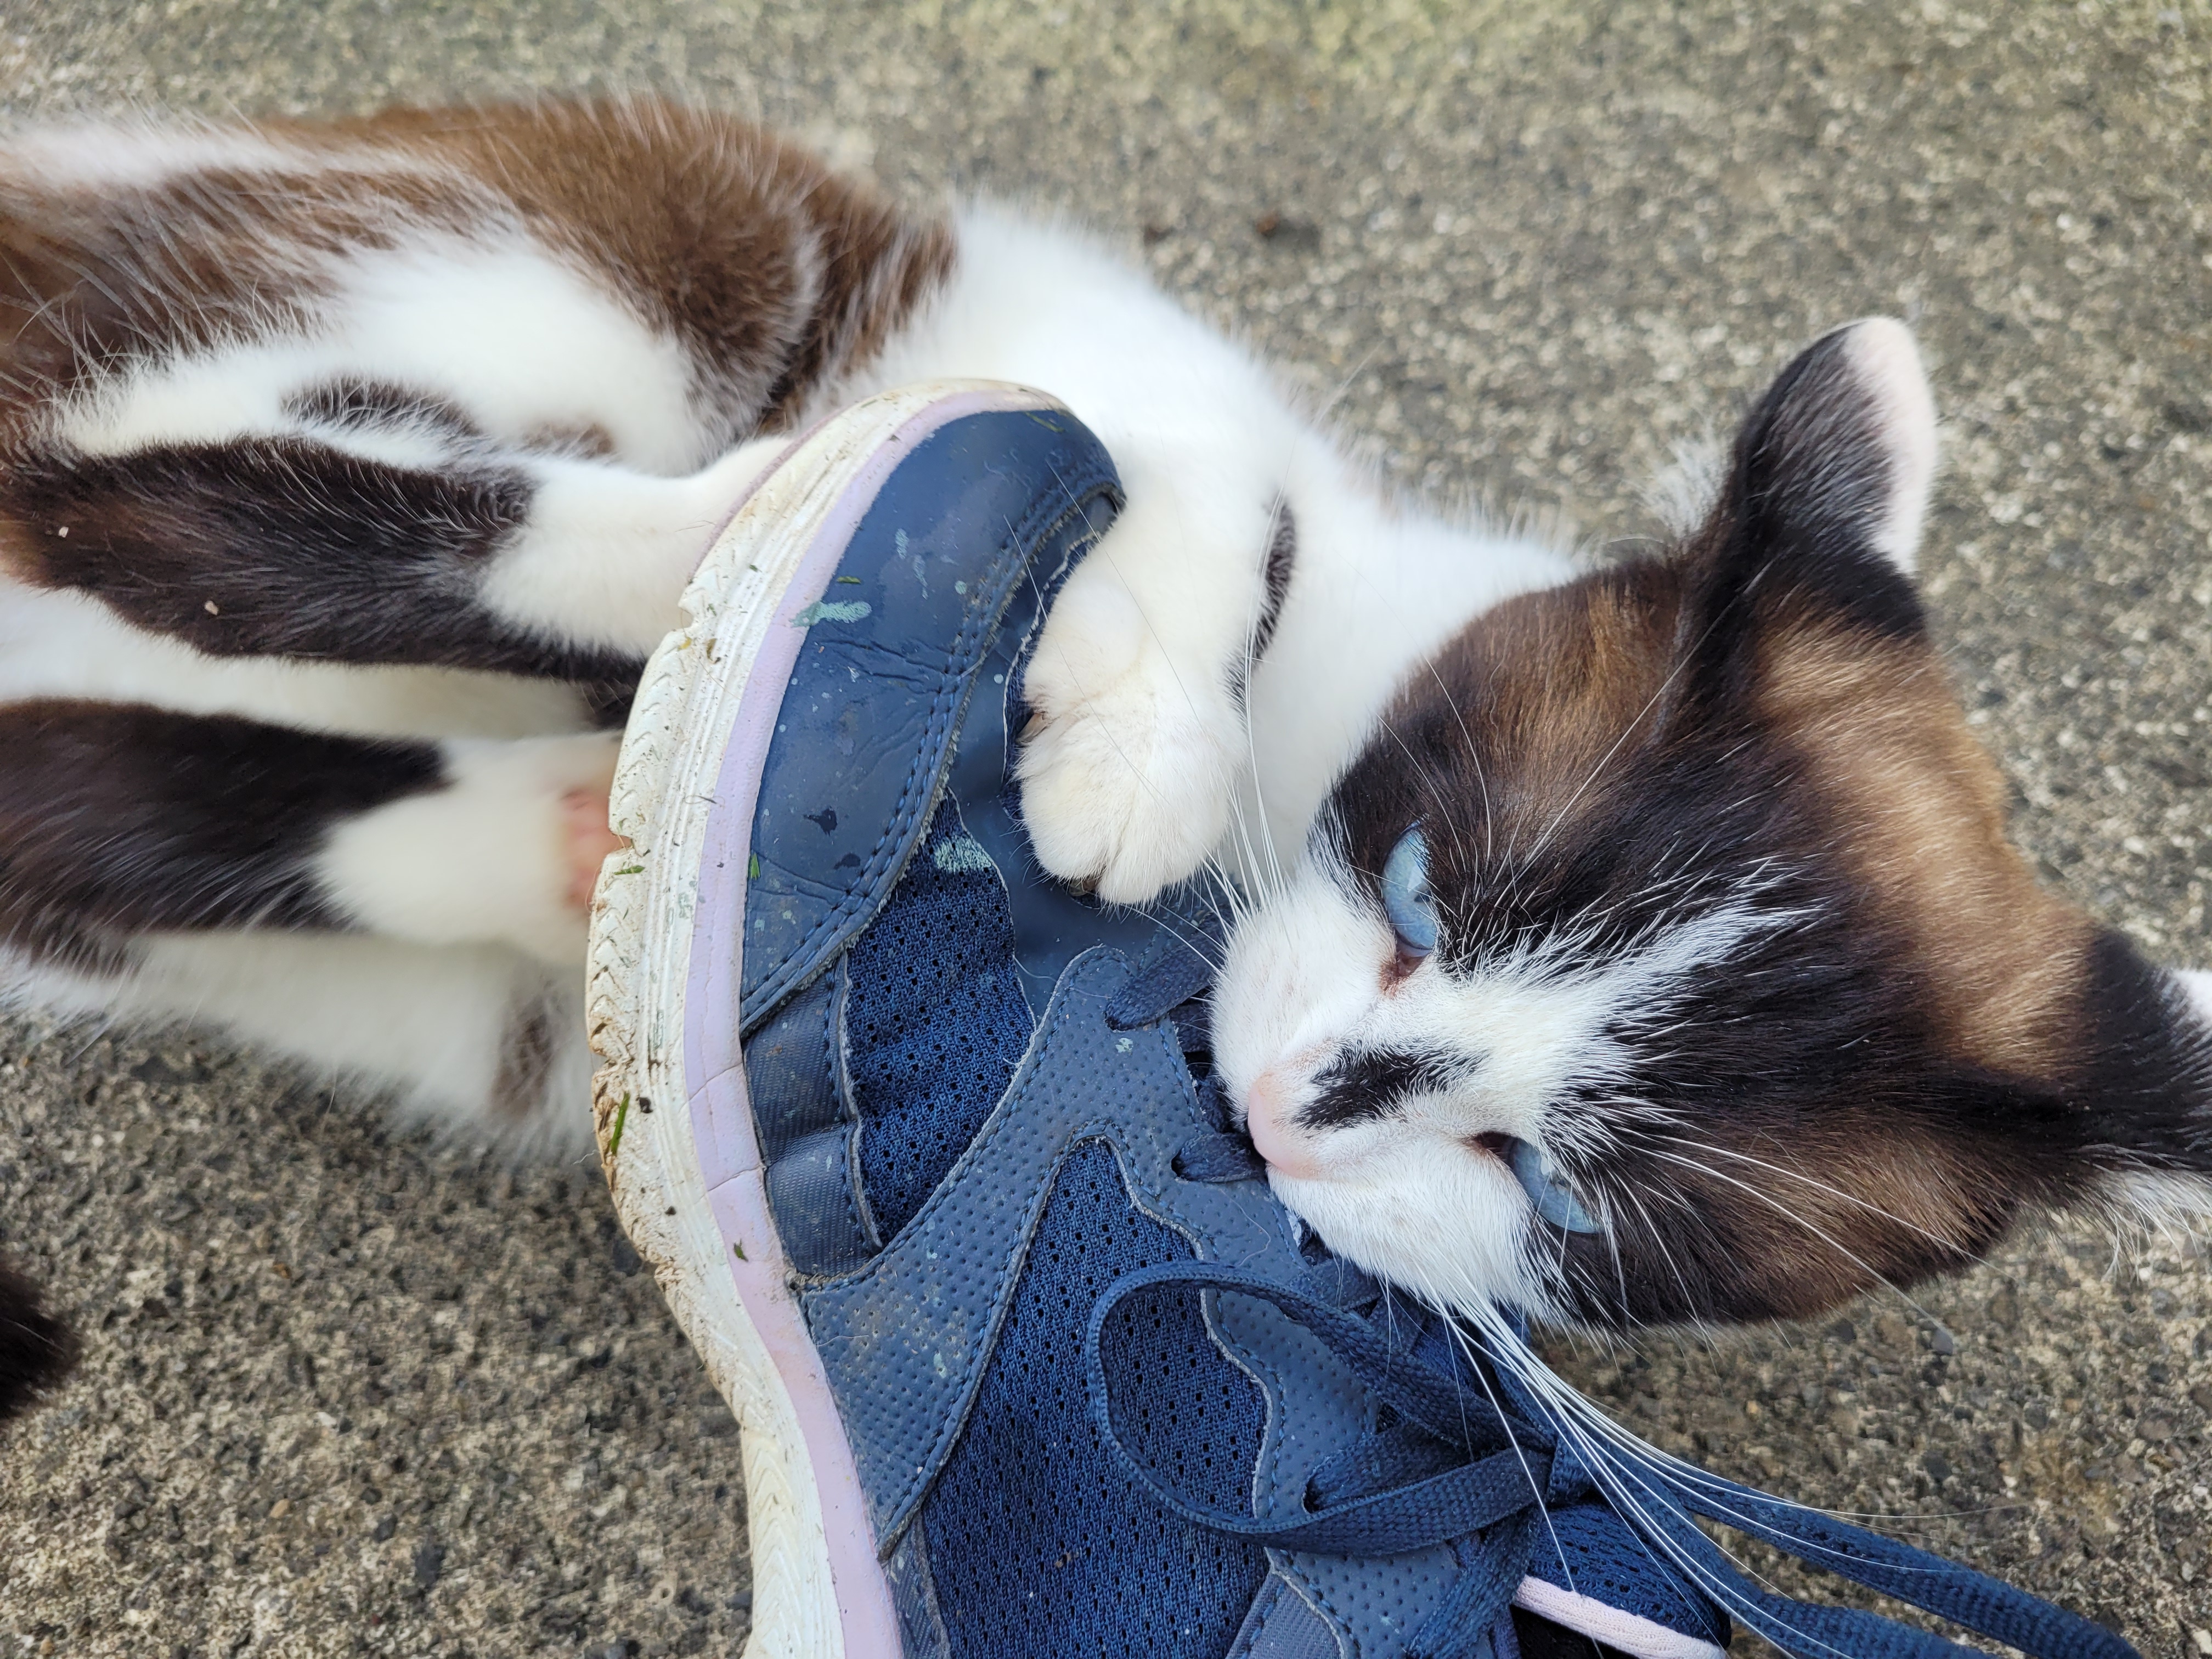 a brown and white ragdoll cat clinging to someone's shoe, playing. she's biting it with all the force she can muster but it mostly makes her look silly. she has big blue eyes and is very cute.